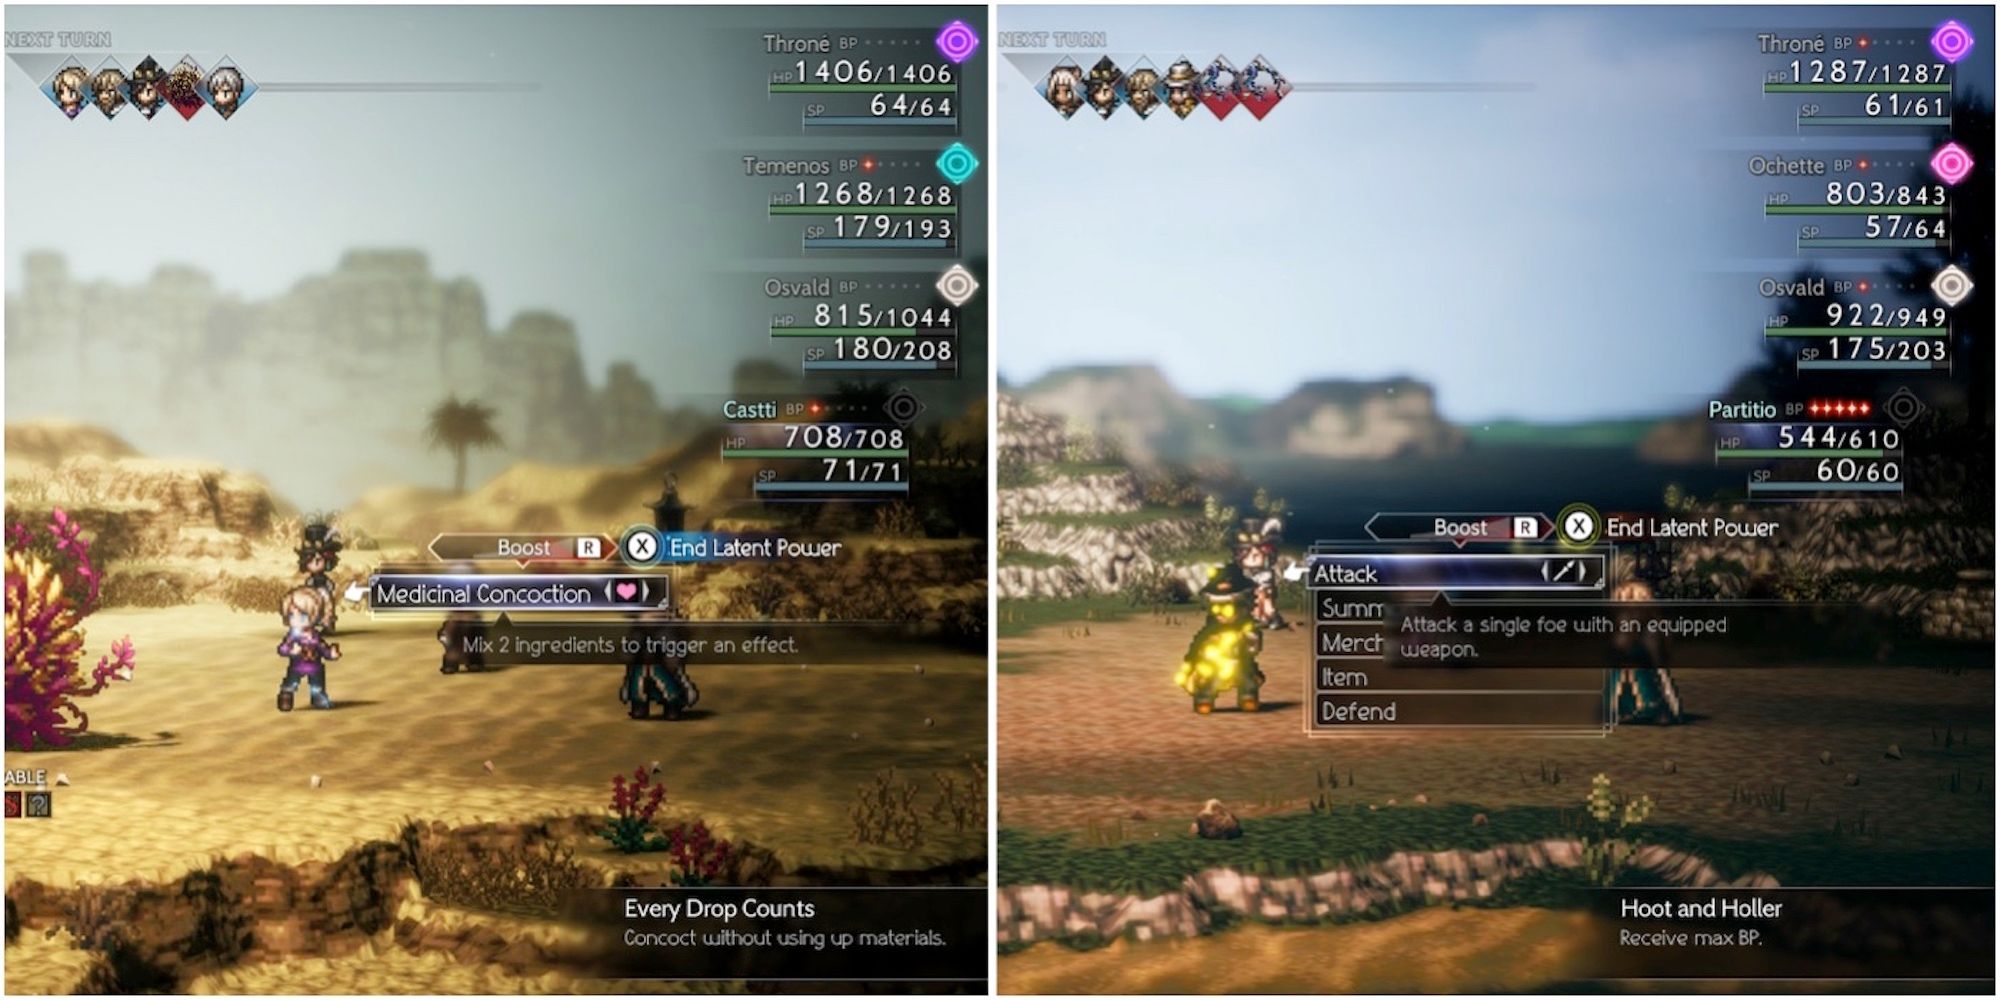 Castti and Partitio activating their Latent Powers in battle in Octopath Traveler 2